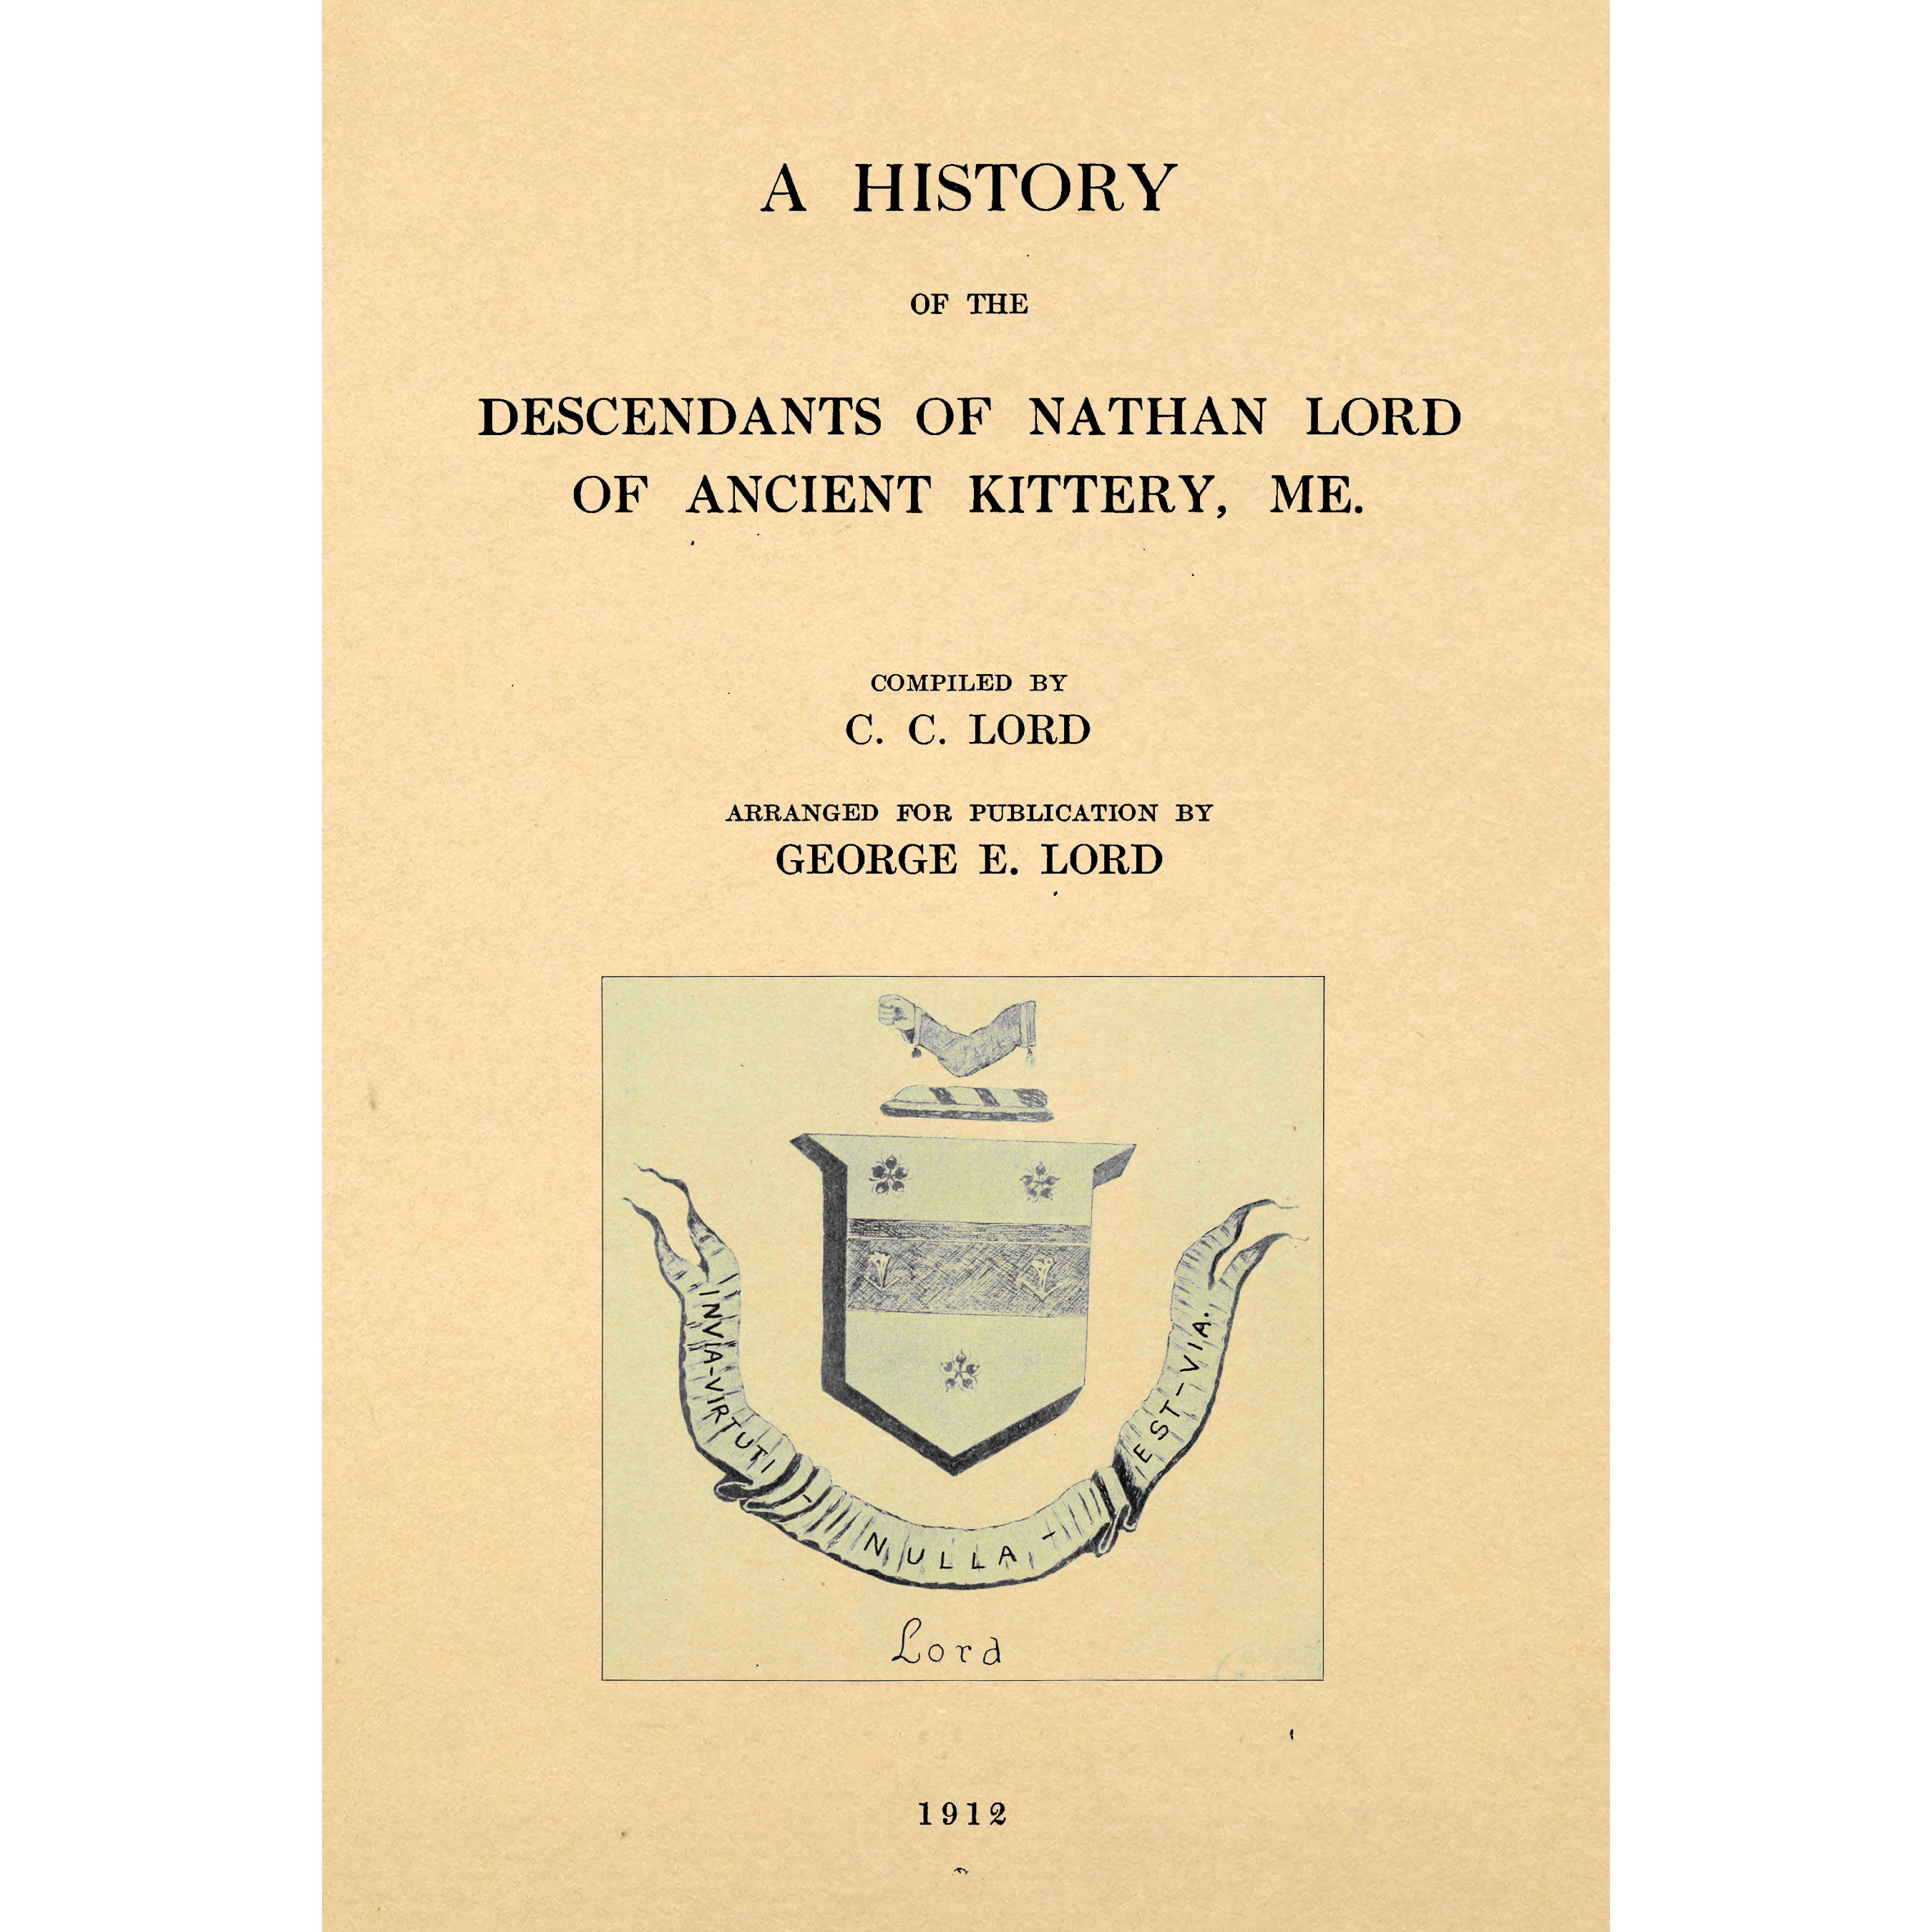 A History of the Descendants of Nathan Lord of Ancient Kittery, ME.